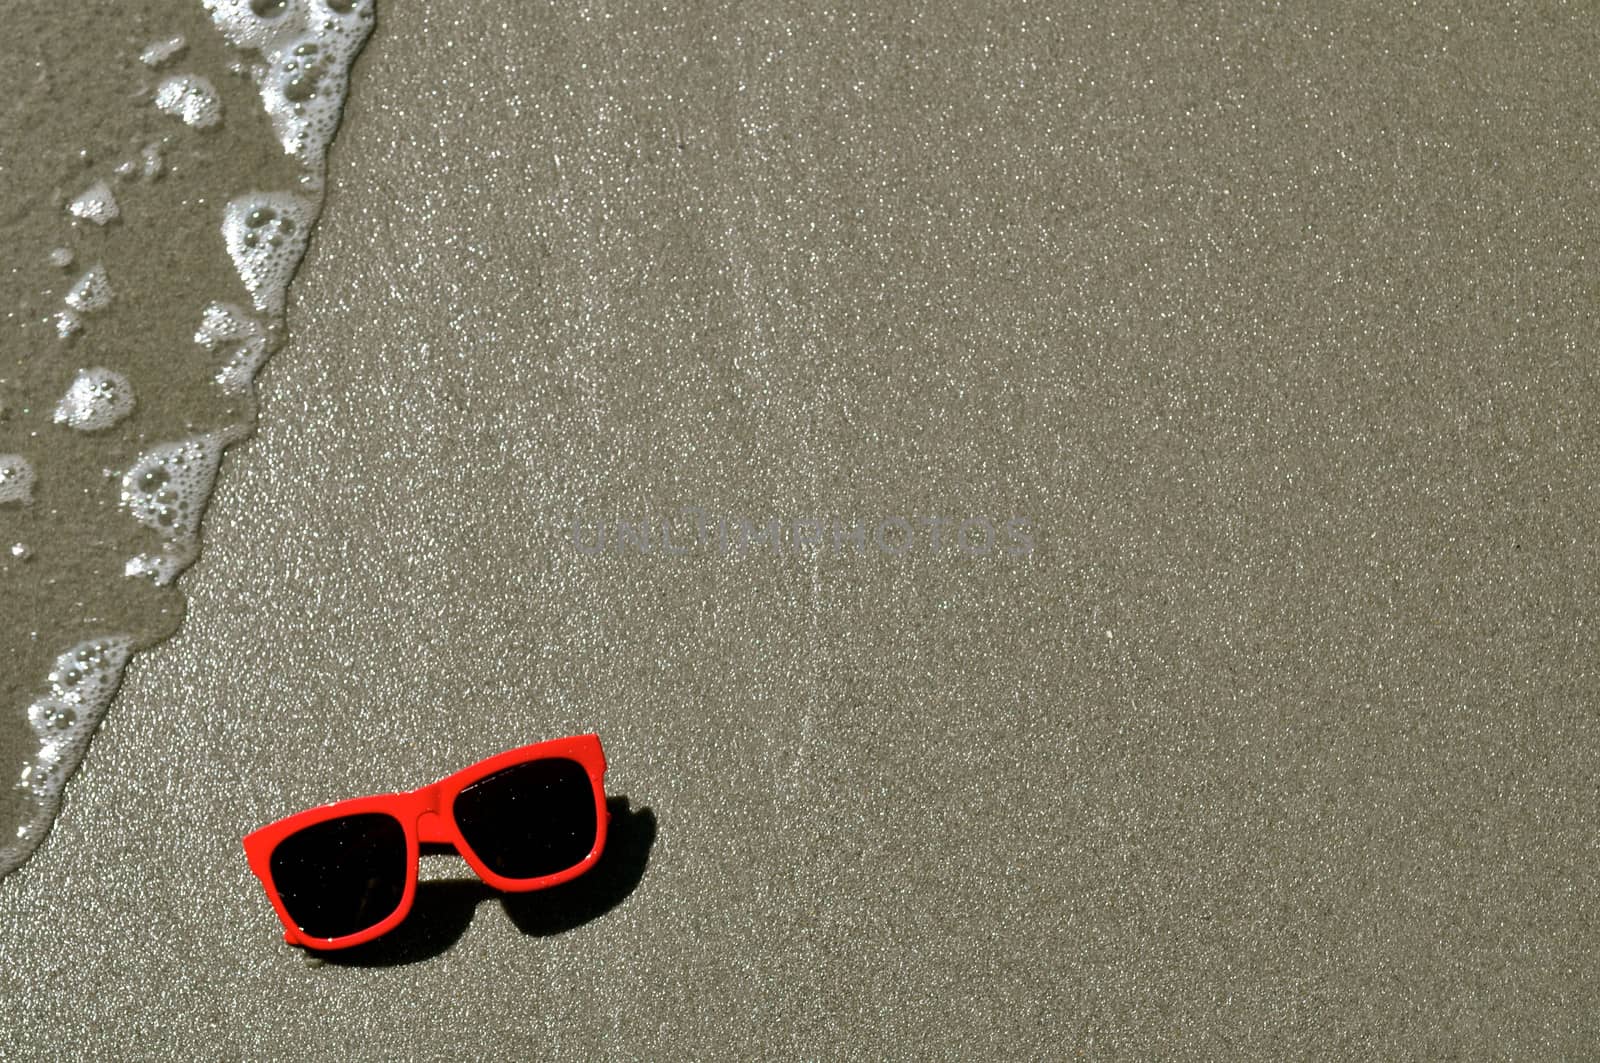 In the Sand - Sunglasses